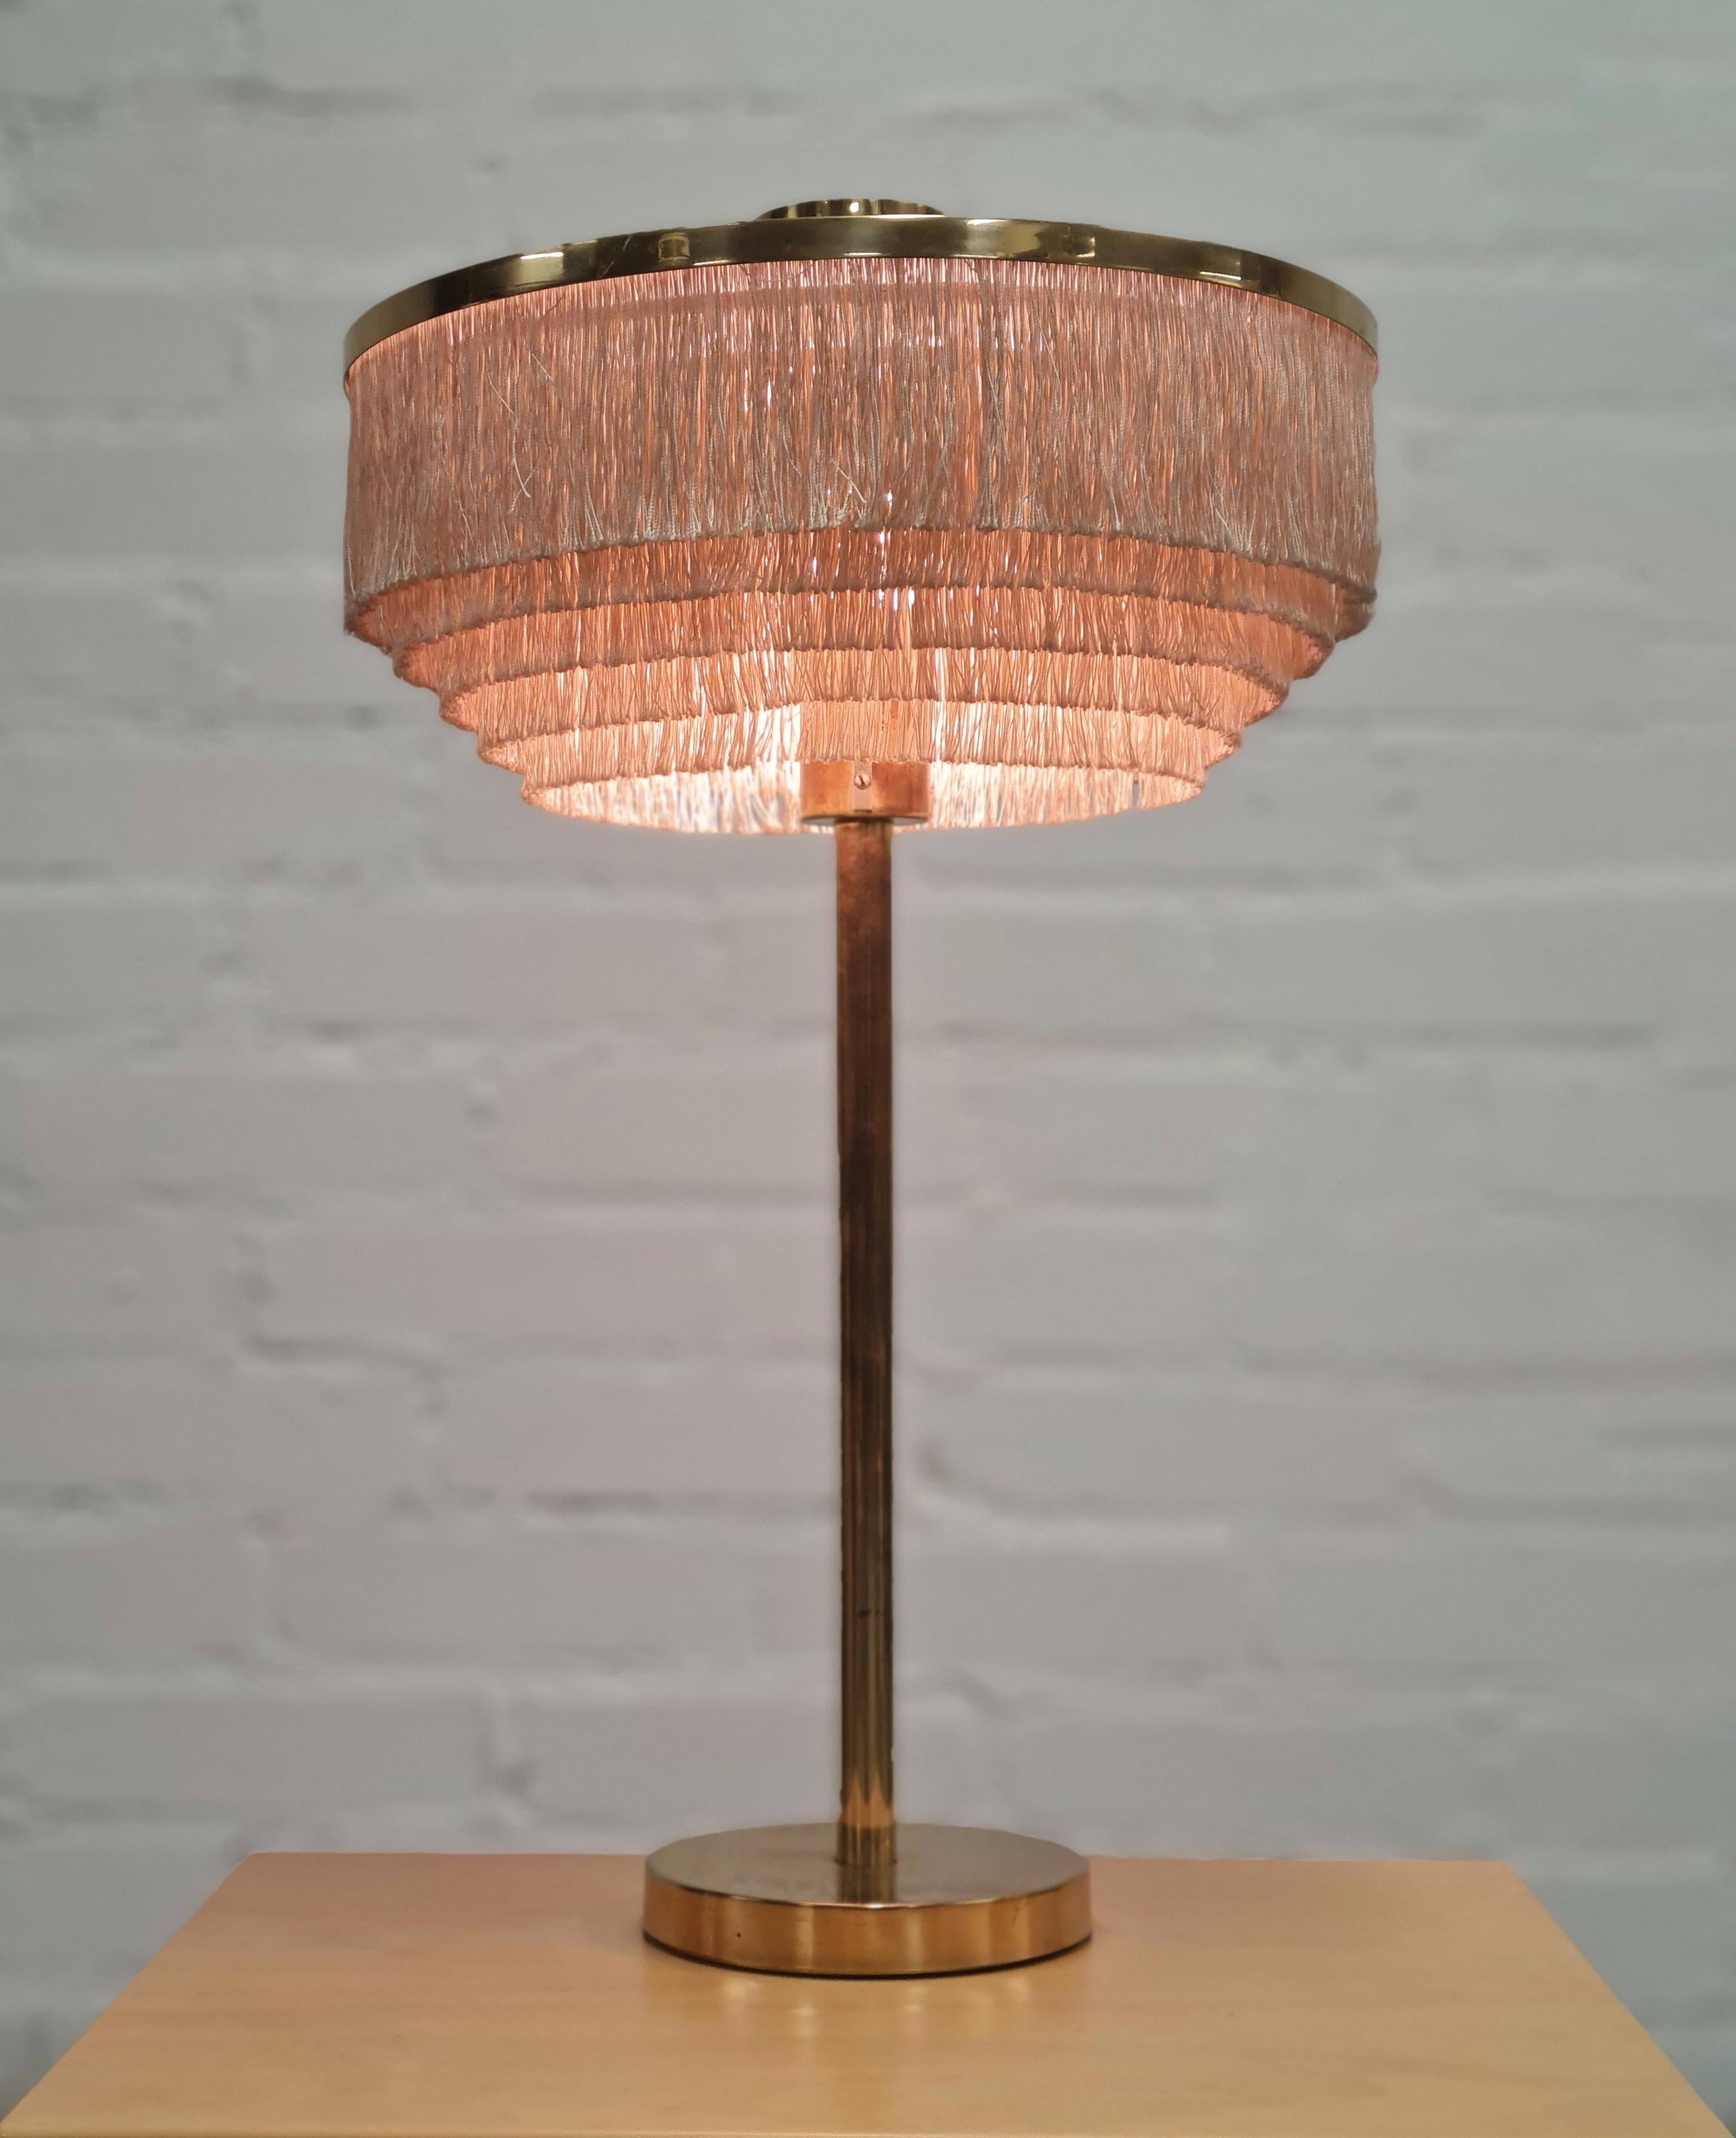 A beautiful example of the Hans-Agne Jakobsson table lamp model B-138 in brass and string fringes. The lamp stands at over 60cm and is quite presentable. The fringes add a soft playful touch to the rigid brass body, which makes it easier to